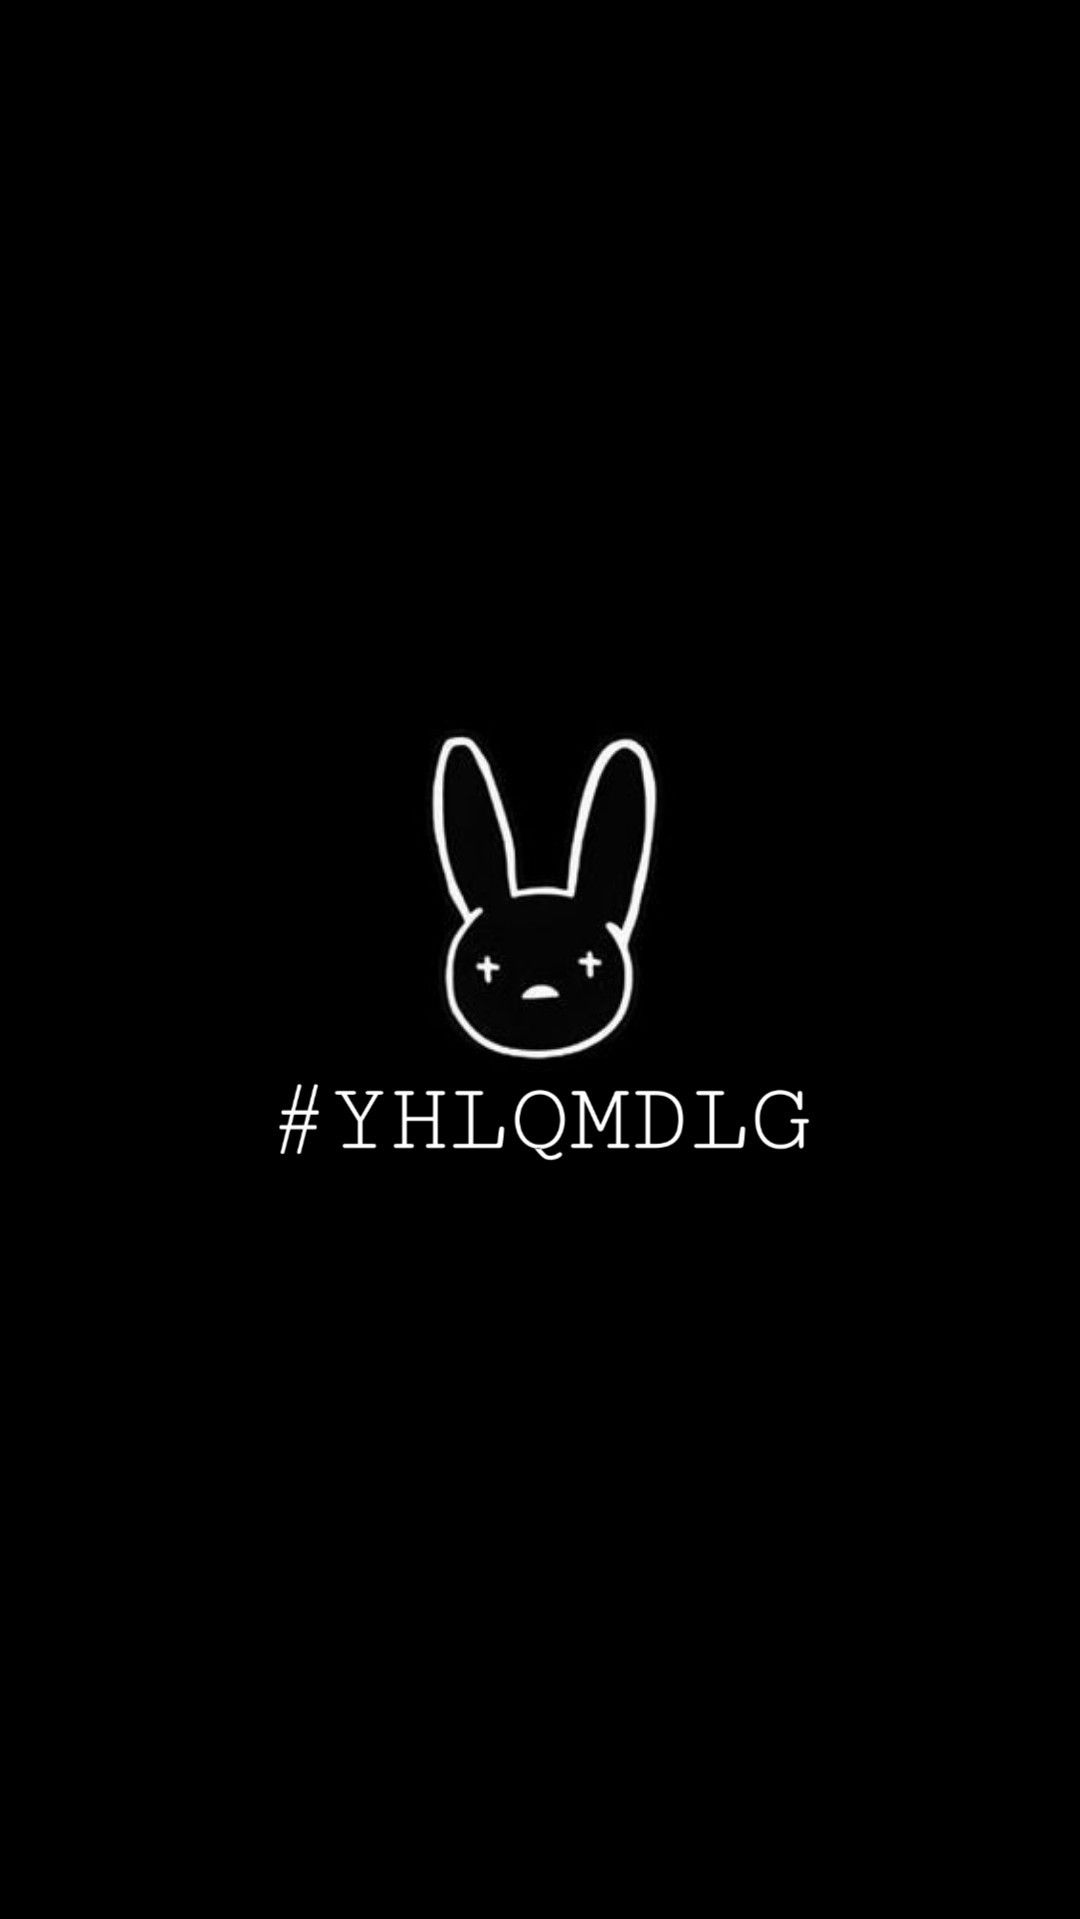 A black background with a white rabbit and the hashtag #YHLQMDLG - Bad Bunny